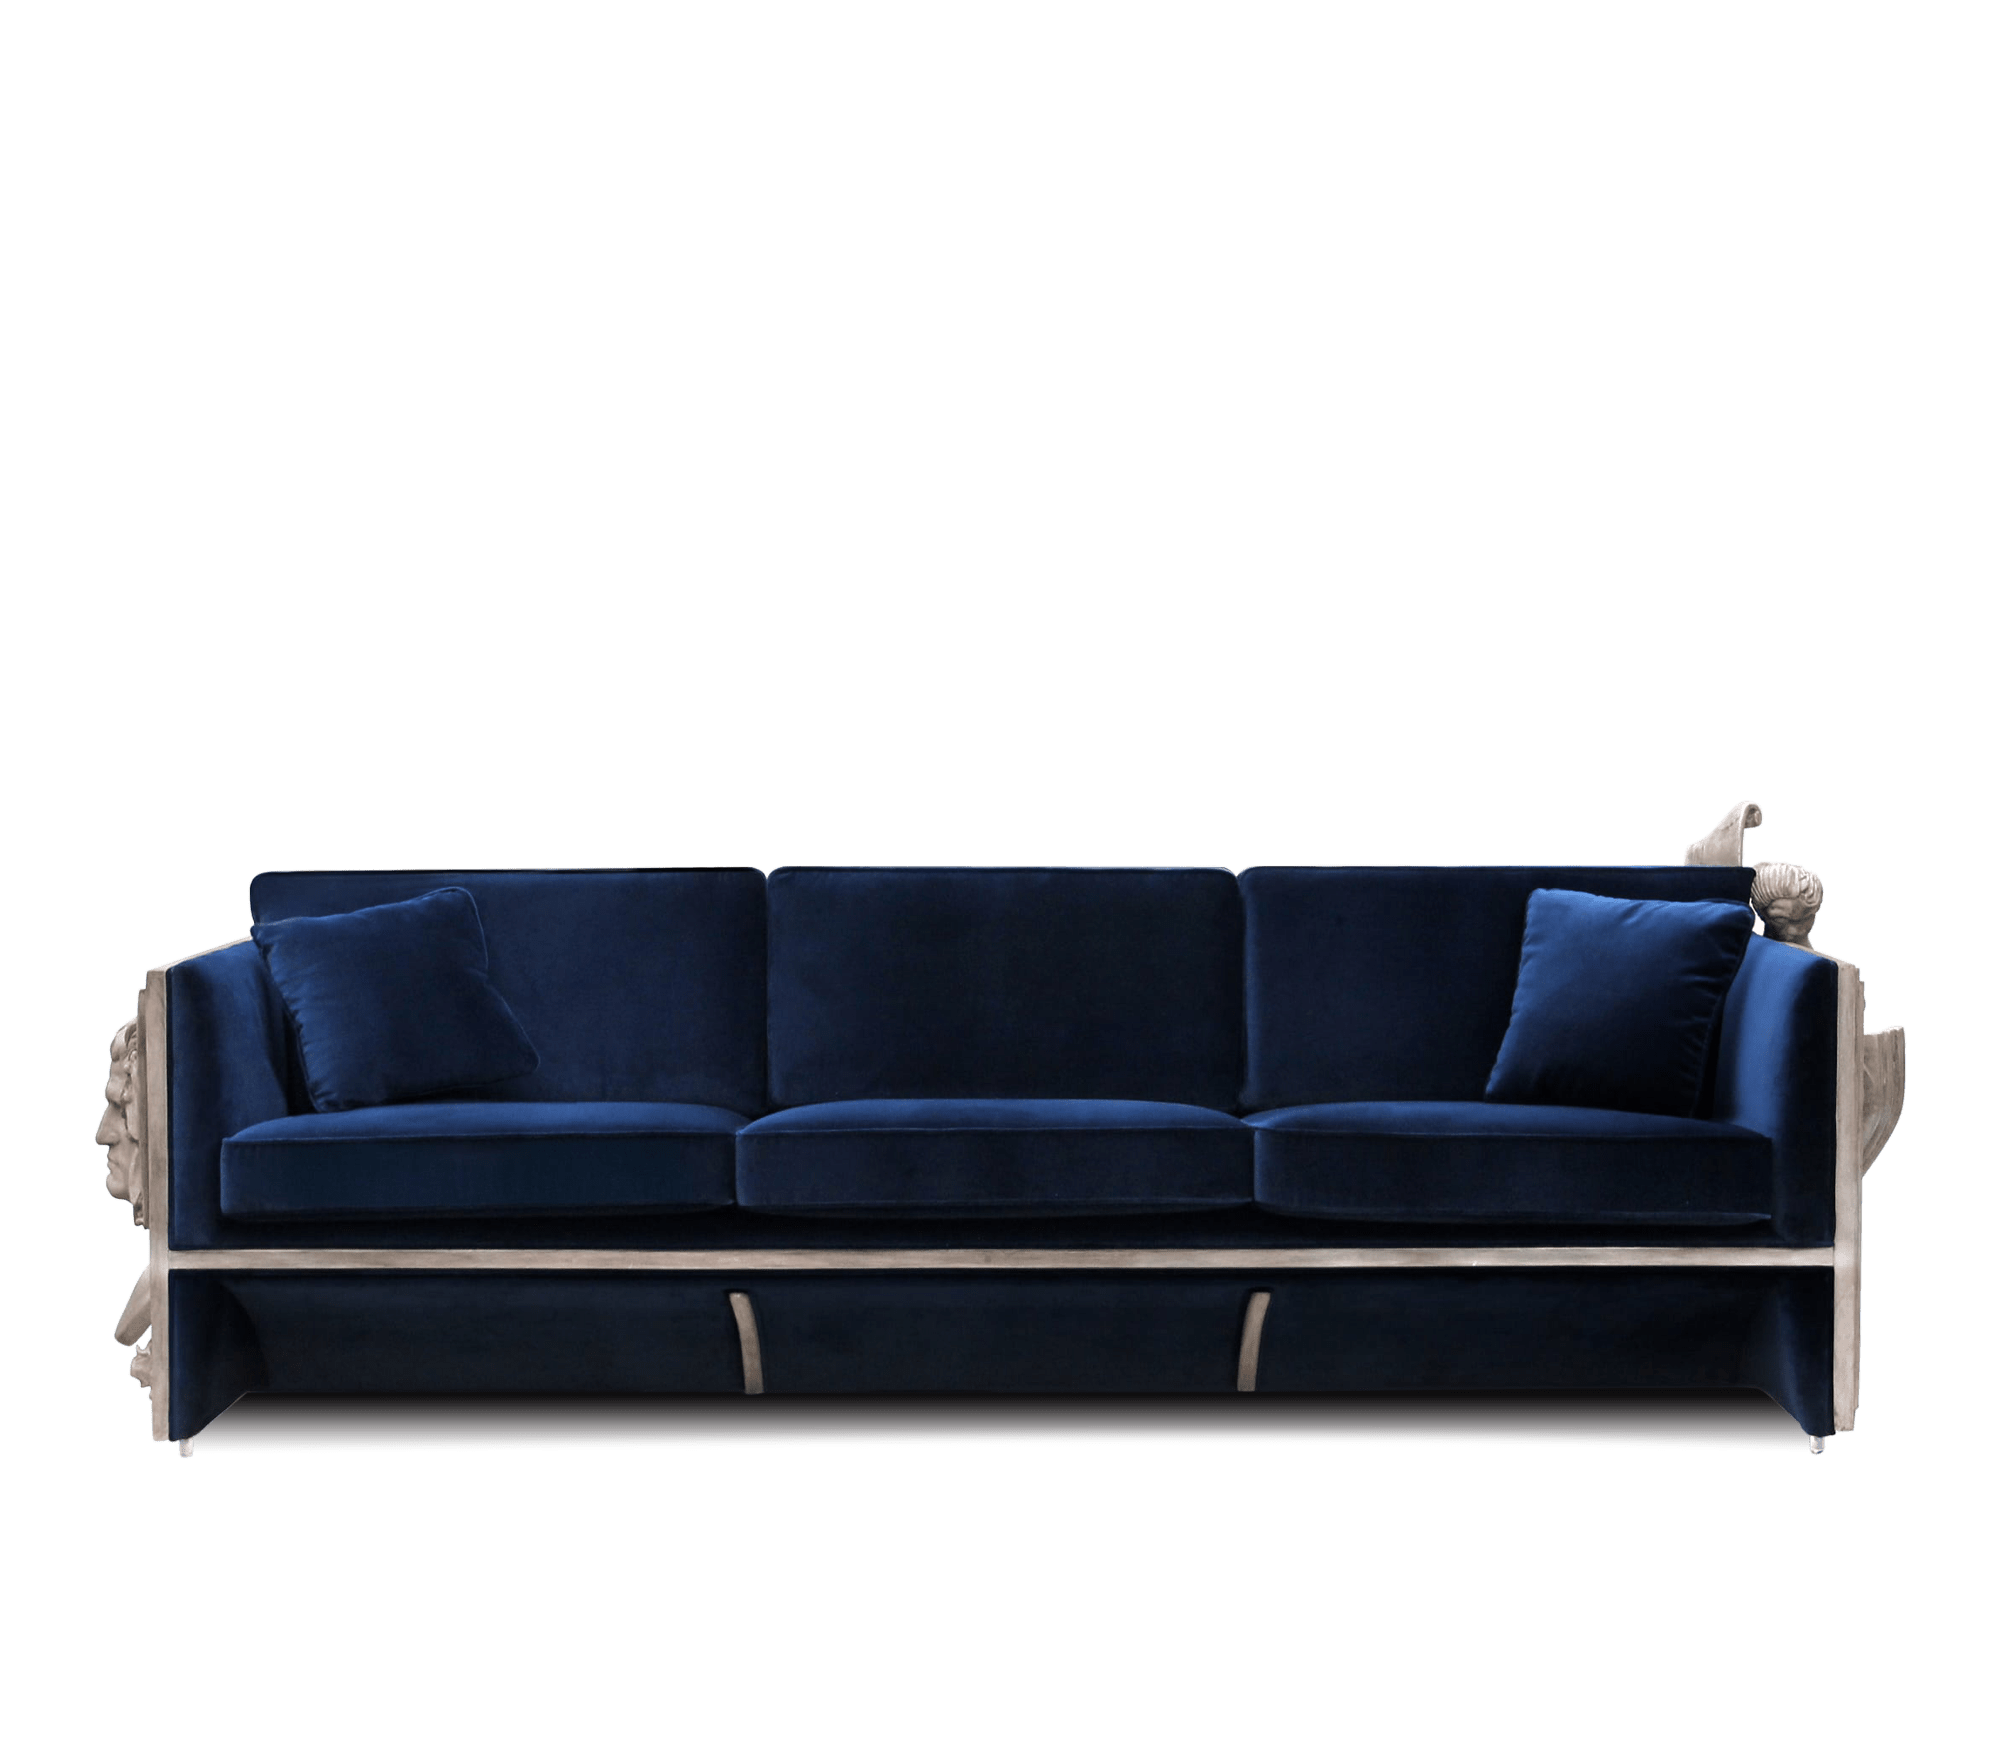 Top 25 Luxury Sofas for a Modern Living Room